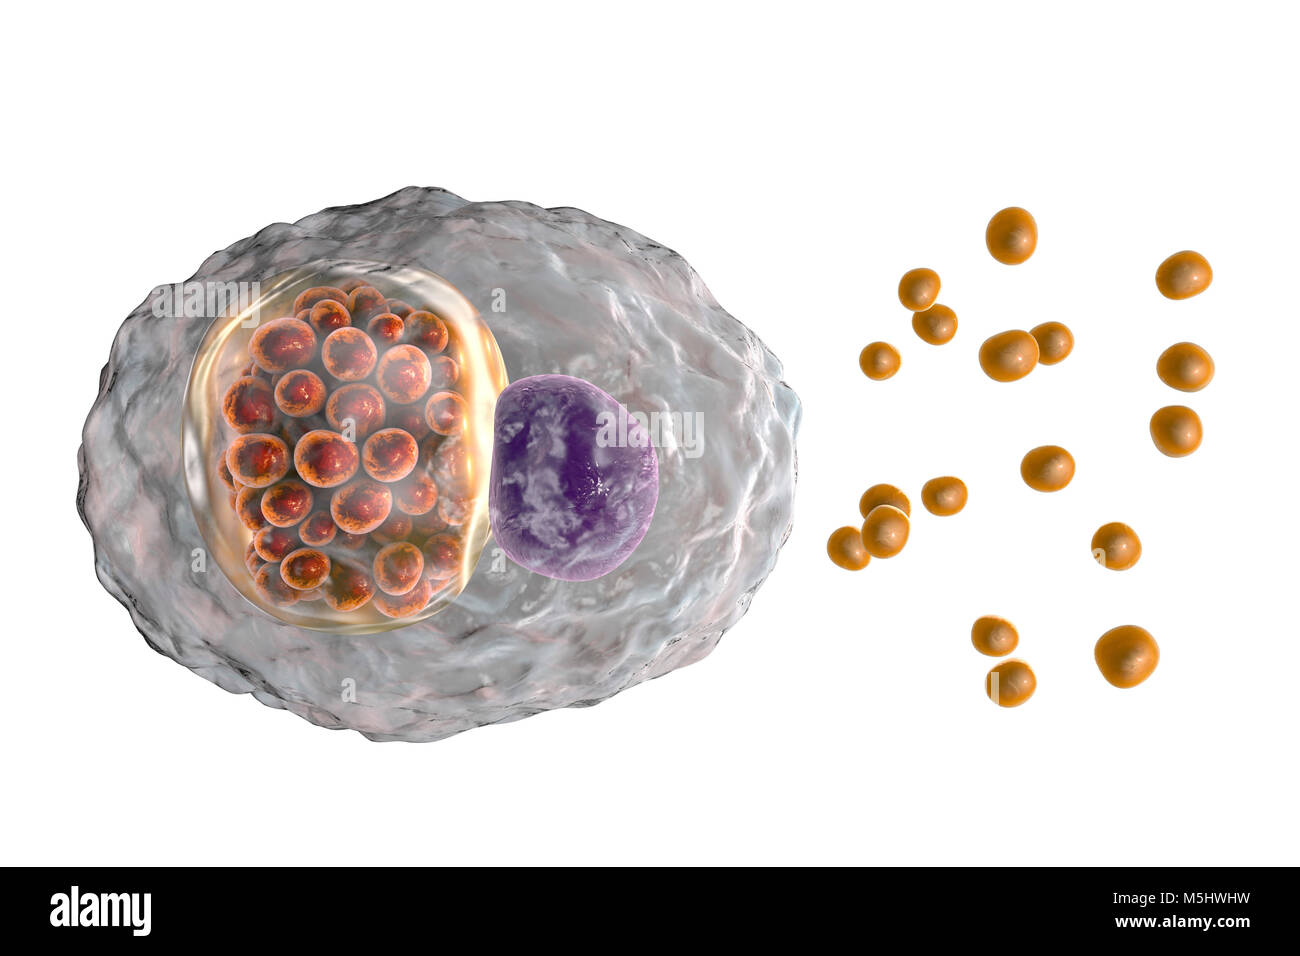 Chlamydia psittaci bacteria. Computer illustration showing two life stages of Chlamydia: elementary bodies (extracellular non-multiplying infectious stage, small orange spheres outside the cell) and an inclusion composed of a group of chlamydia reticulate bodies (intracellular multiplying stage, small orange spheres inside the cel) near the nucleus (violet) of a cell. Chlamydia species are atypical bacteria in that they are obligate intracellular parasites, living and reproducing only inside cells. This species causes abortion in animals and lung disease in humans. Stock Photo